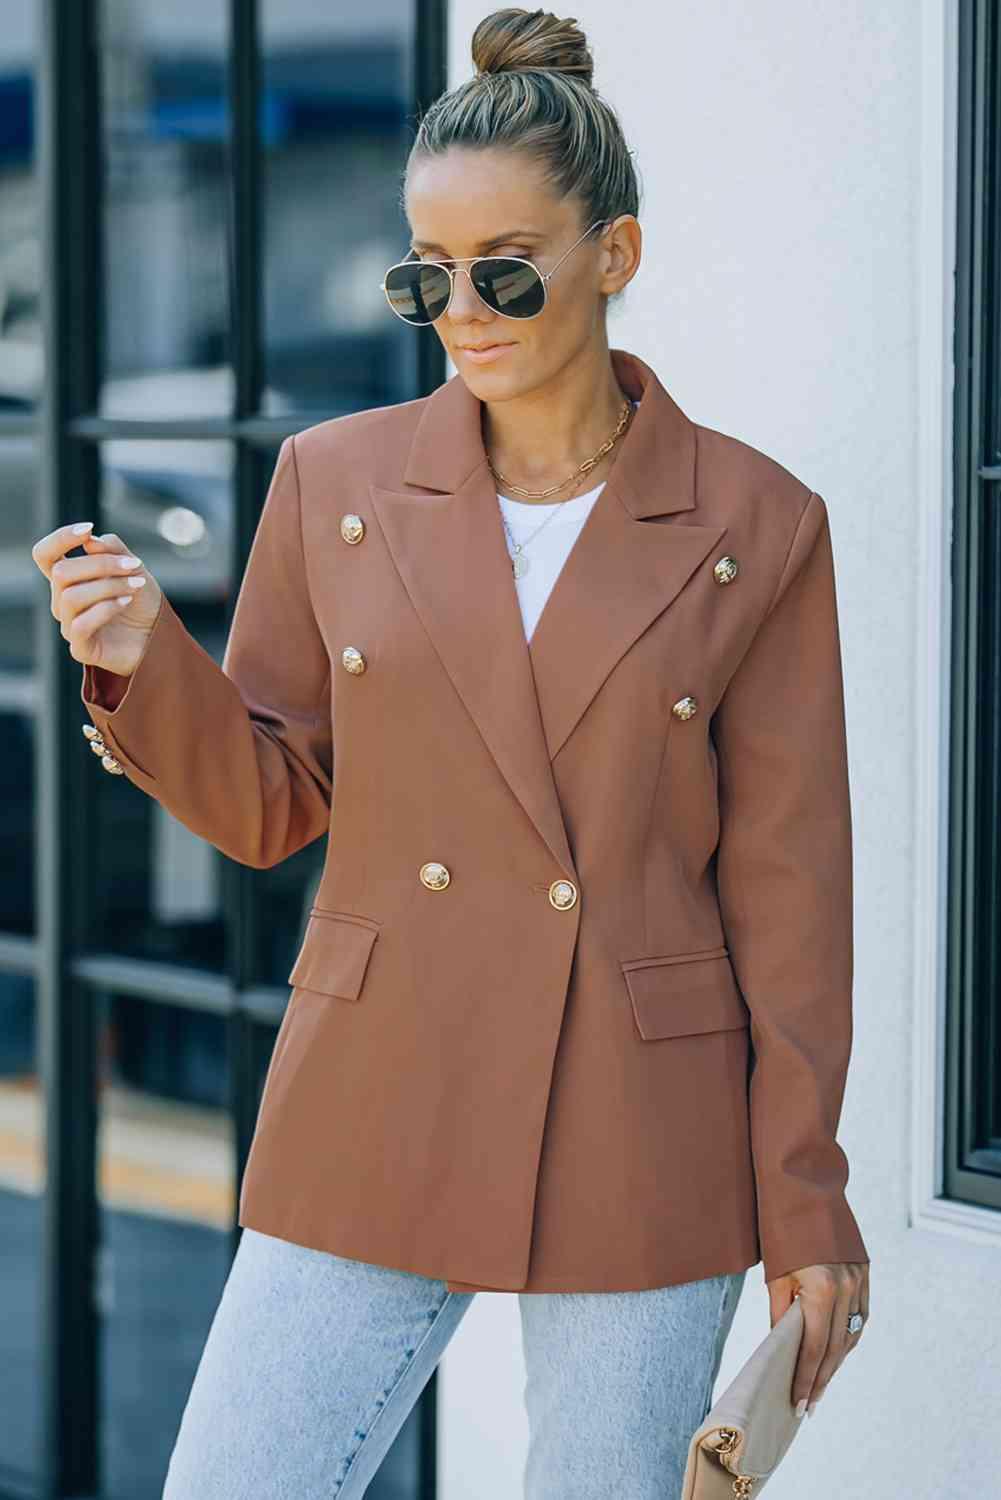 a woman wearing a brown blazer and jeans